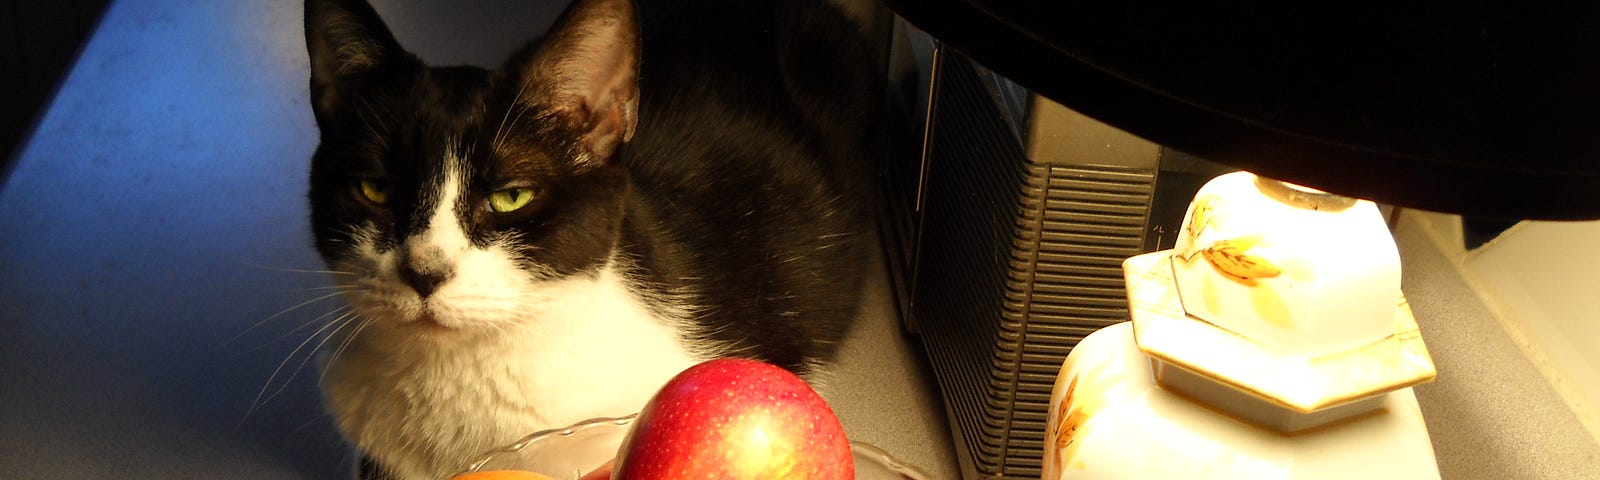 Author’s photo of Home Boy cat sitting on a table near a bowl of apples and a lamp